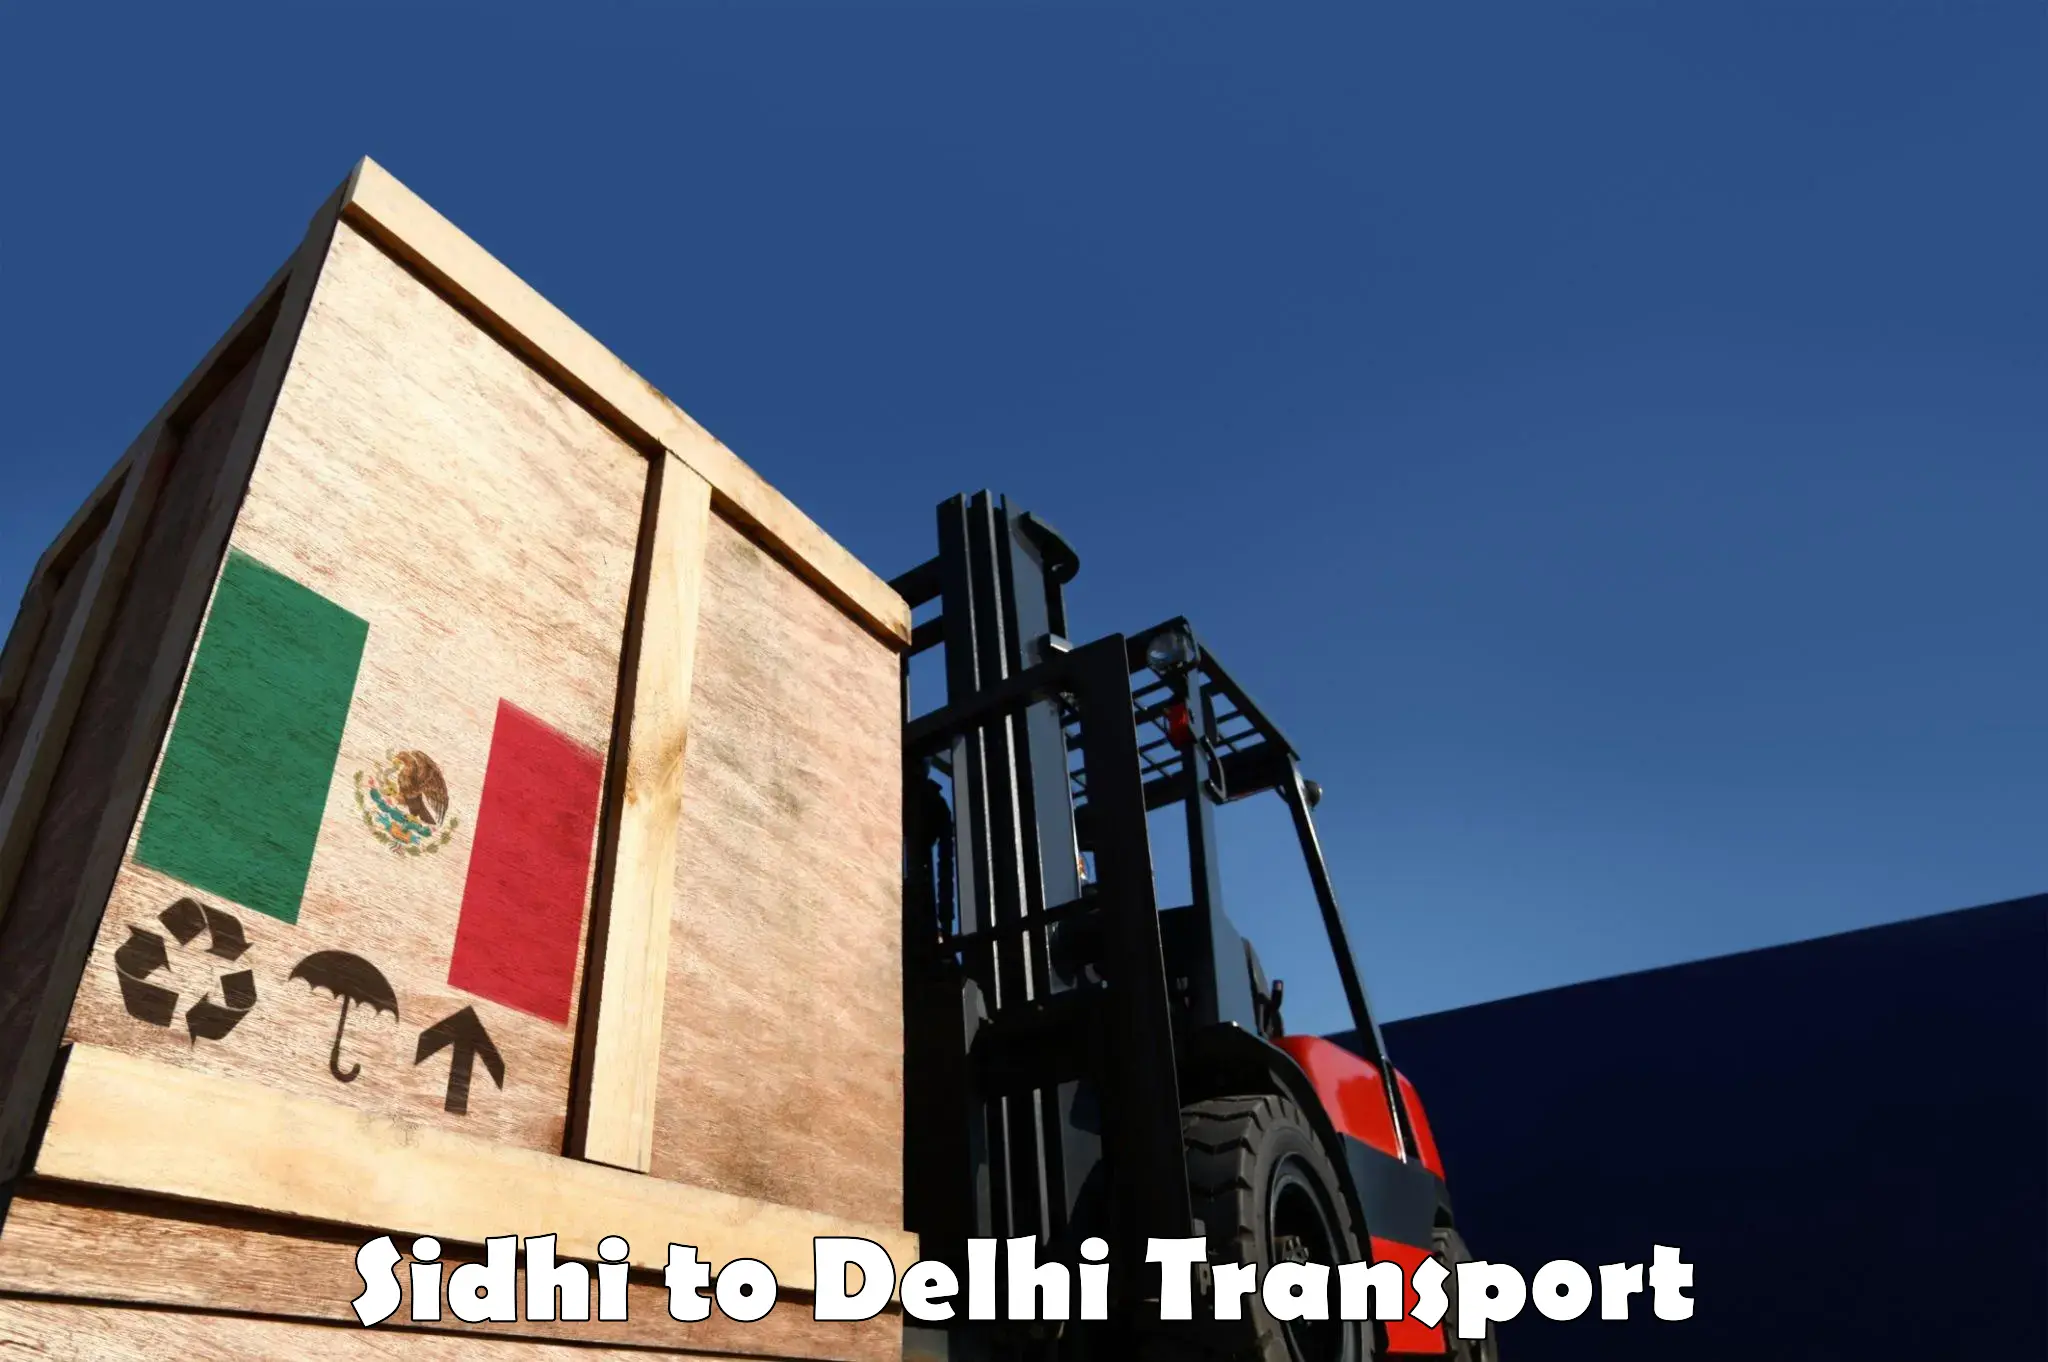 Nearby transport service Sidhi to Delhi